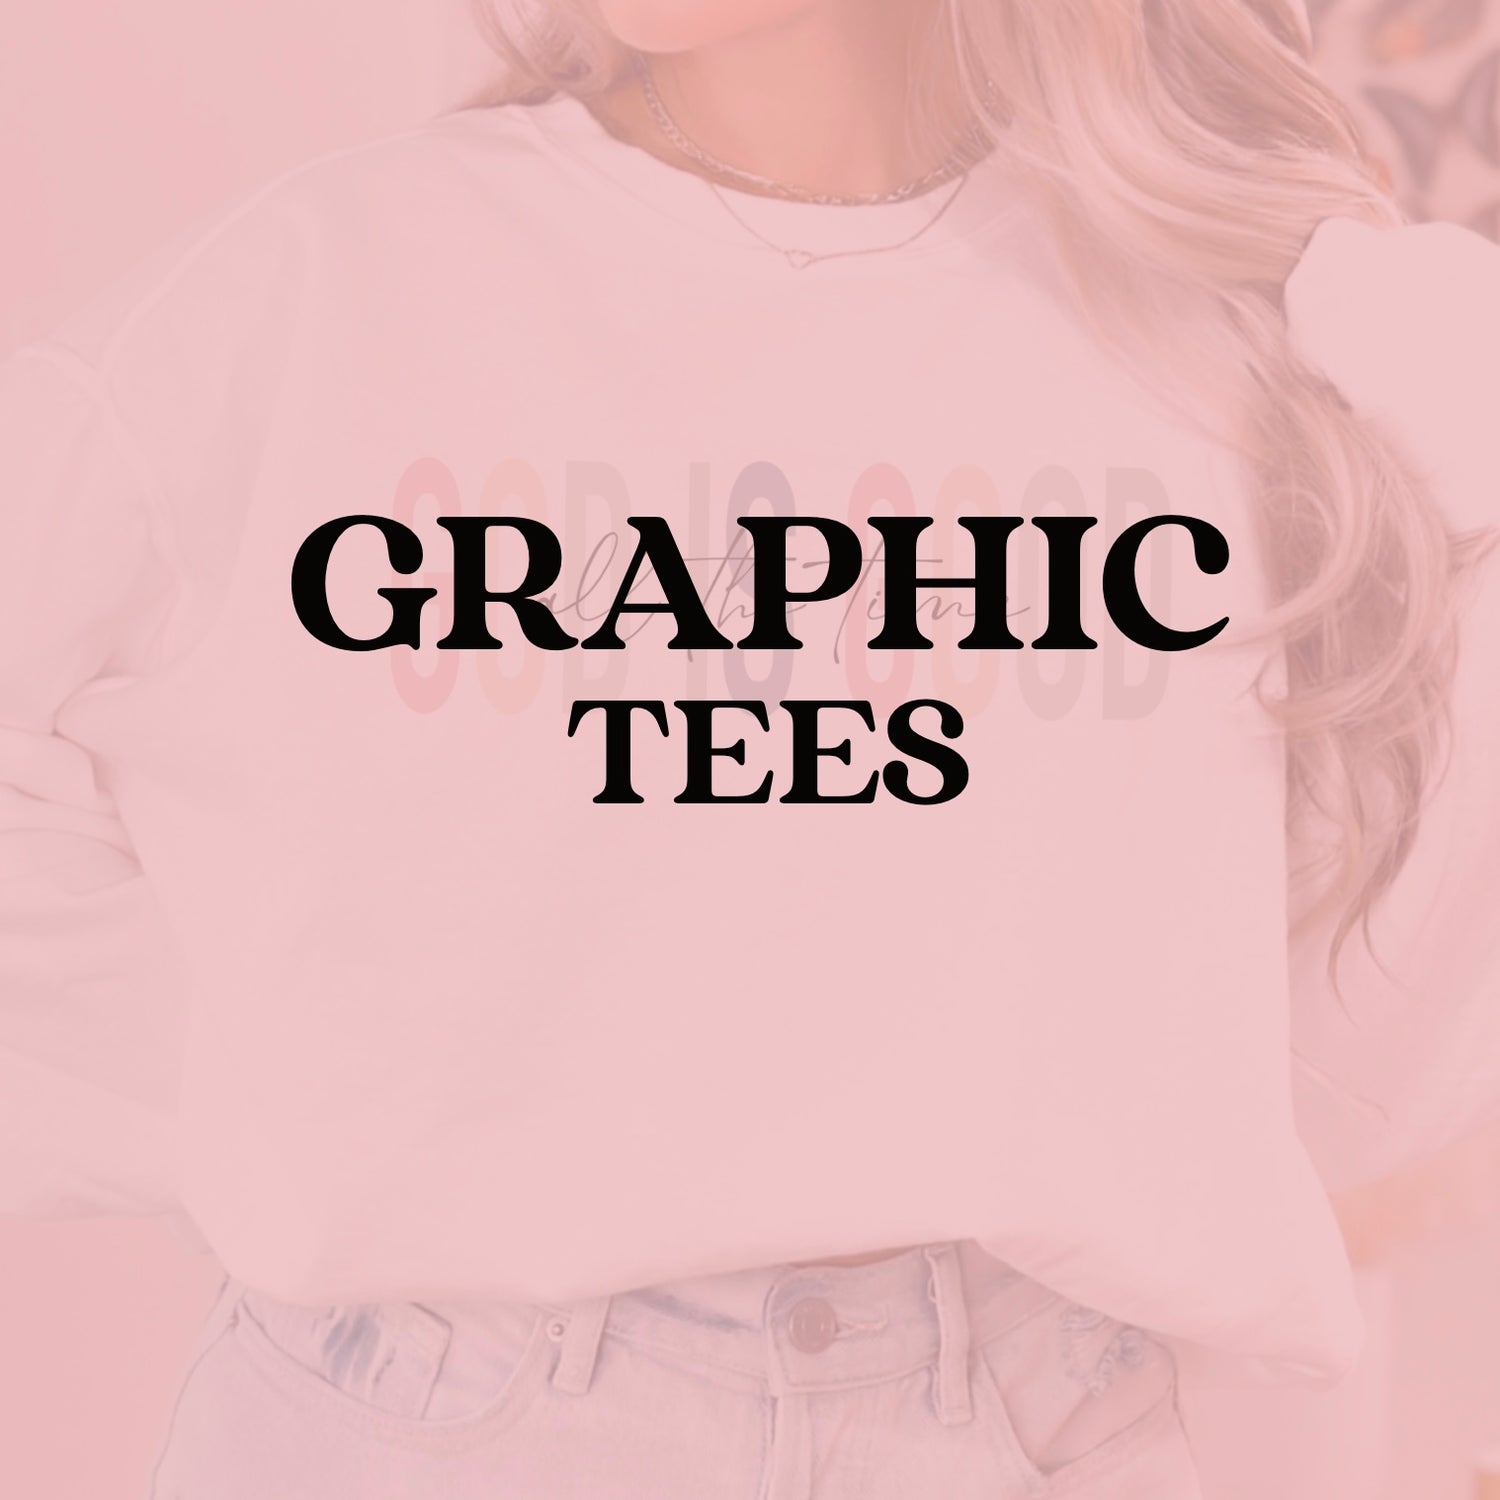 All Graphic Tees